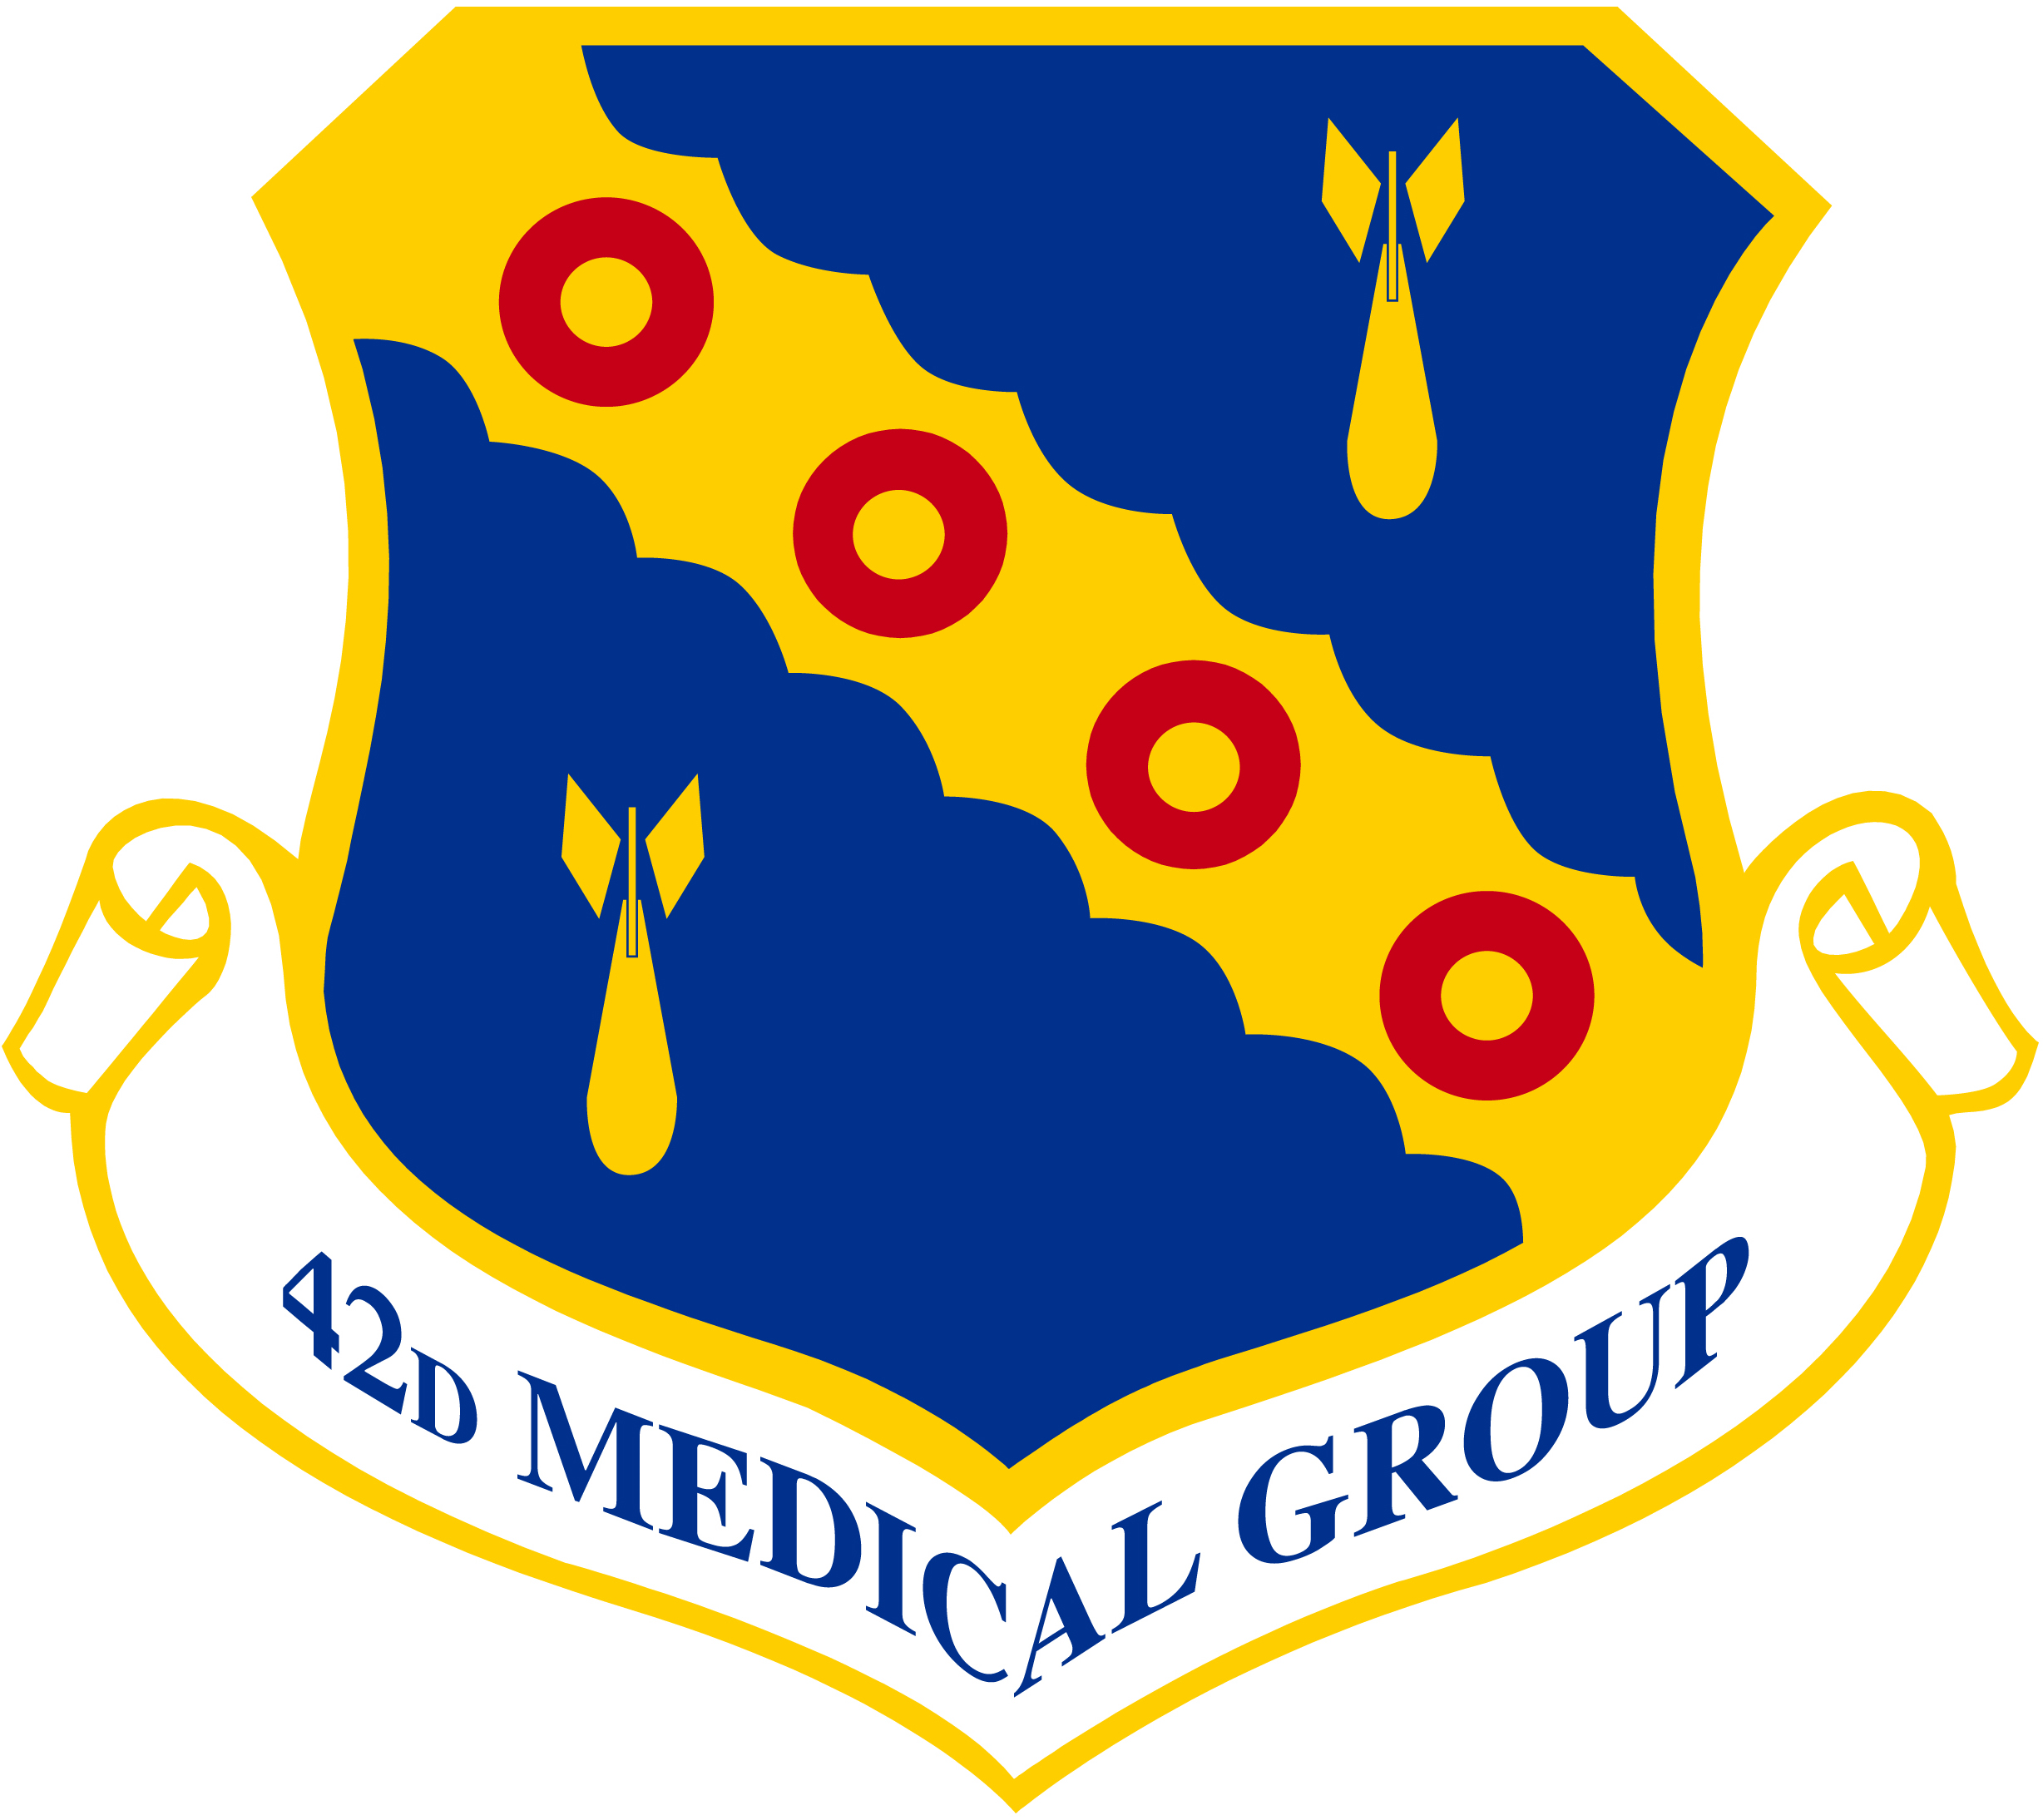 42nd Medical Group insignia